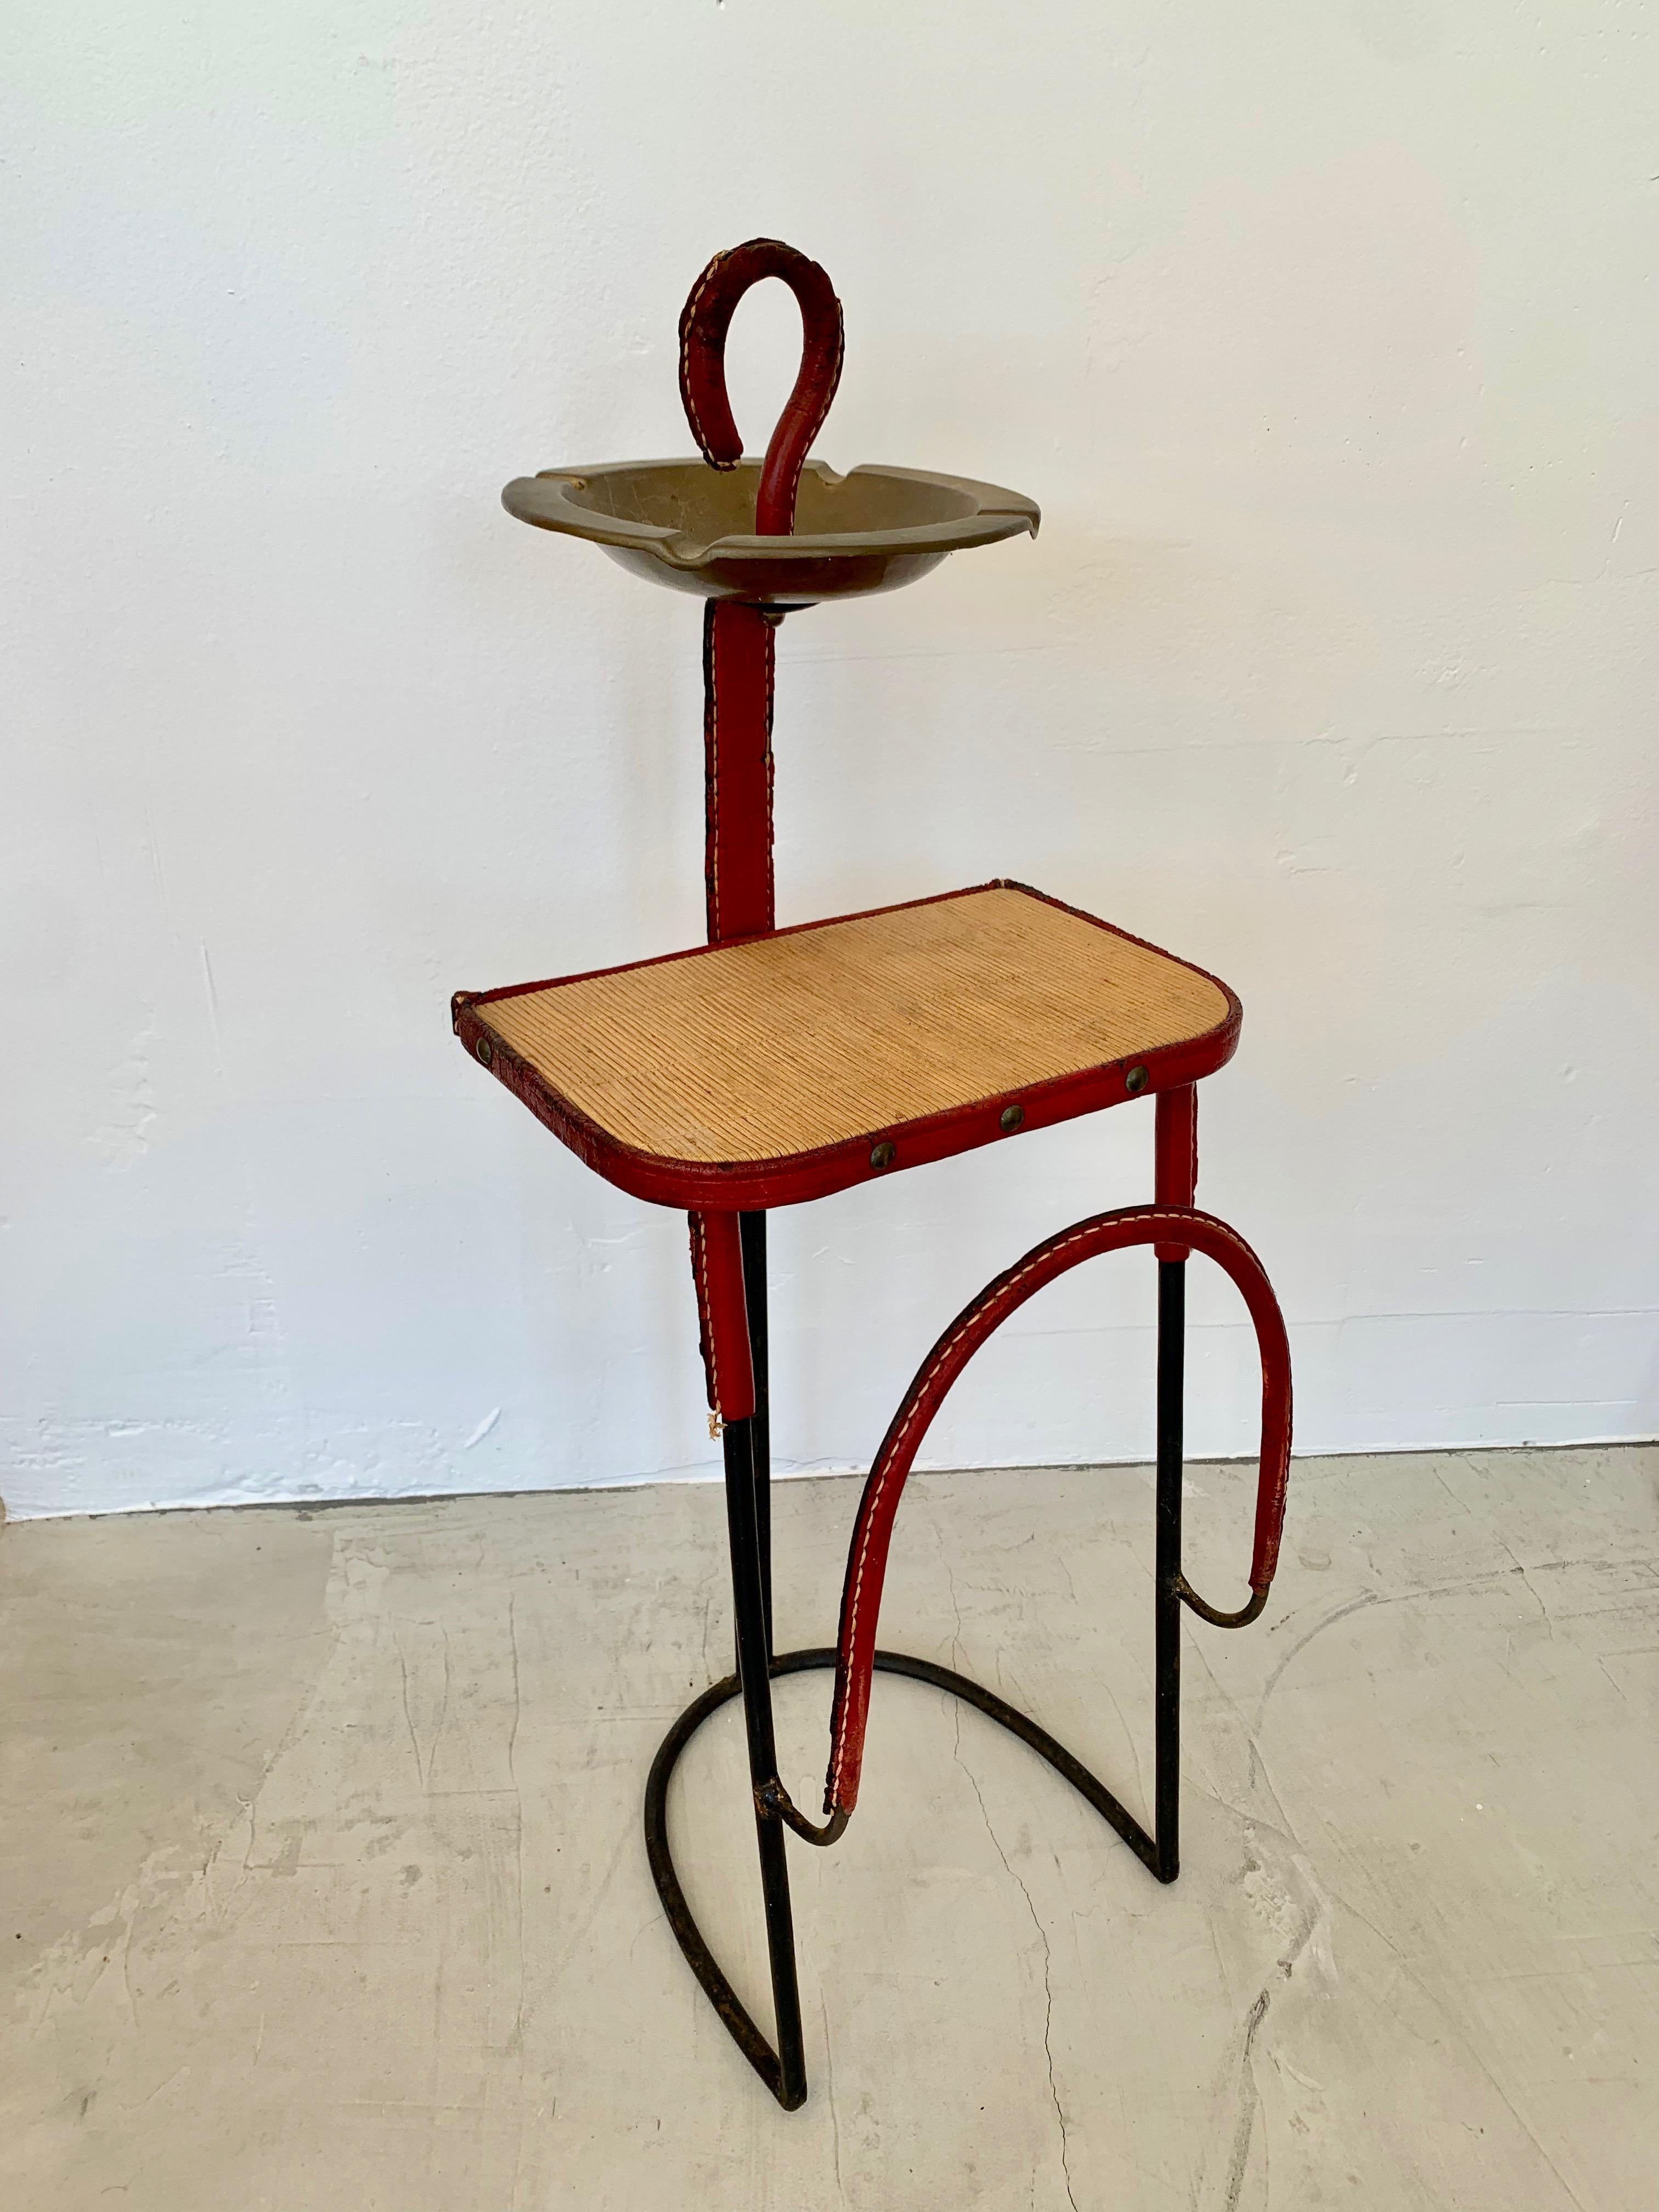 Very unusual 3 in 1 side table by Jacques Adnet. Iron frame with leather wrapped trim. Wood side table wrapped in leather. Magazine rack on the front. And brass ashtray or catchall at the top. Great sculptural piece and excellent example of Adnet